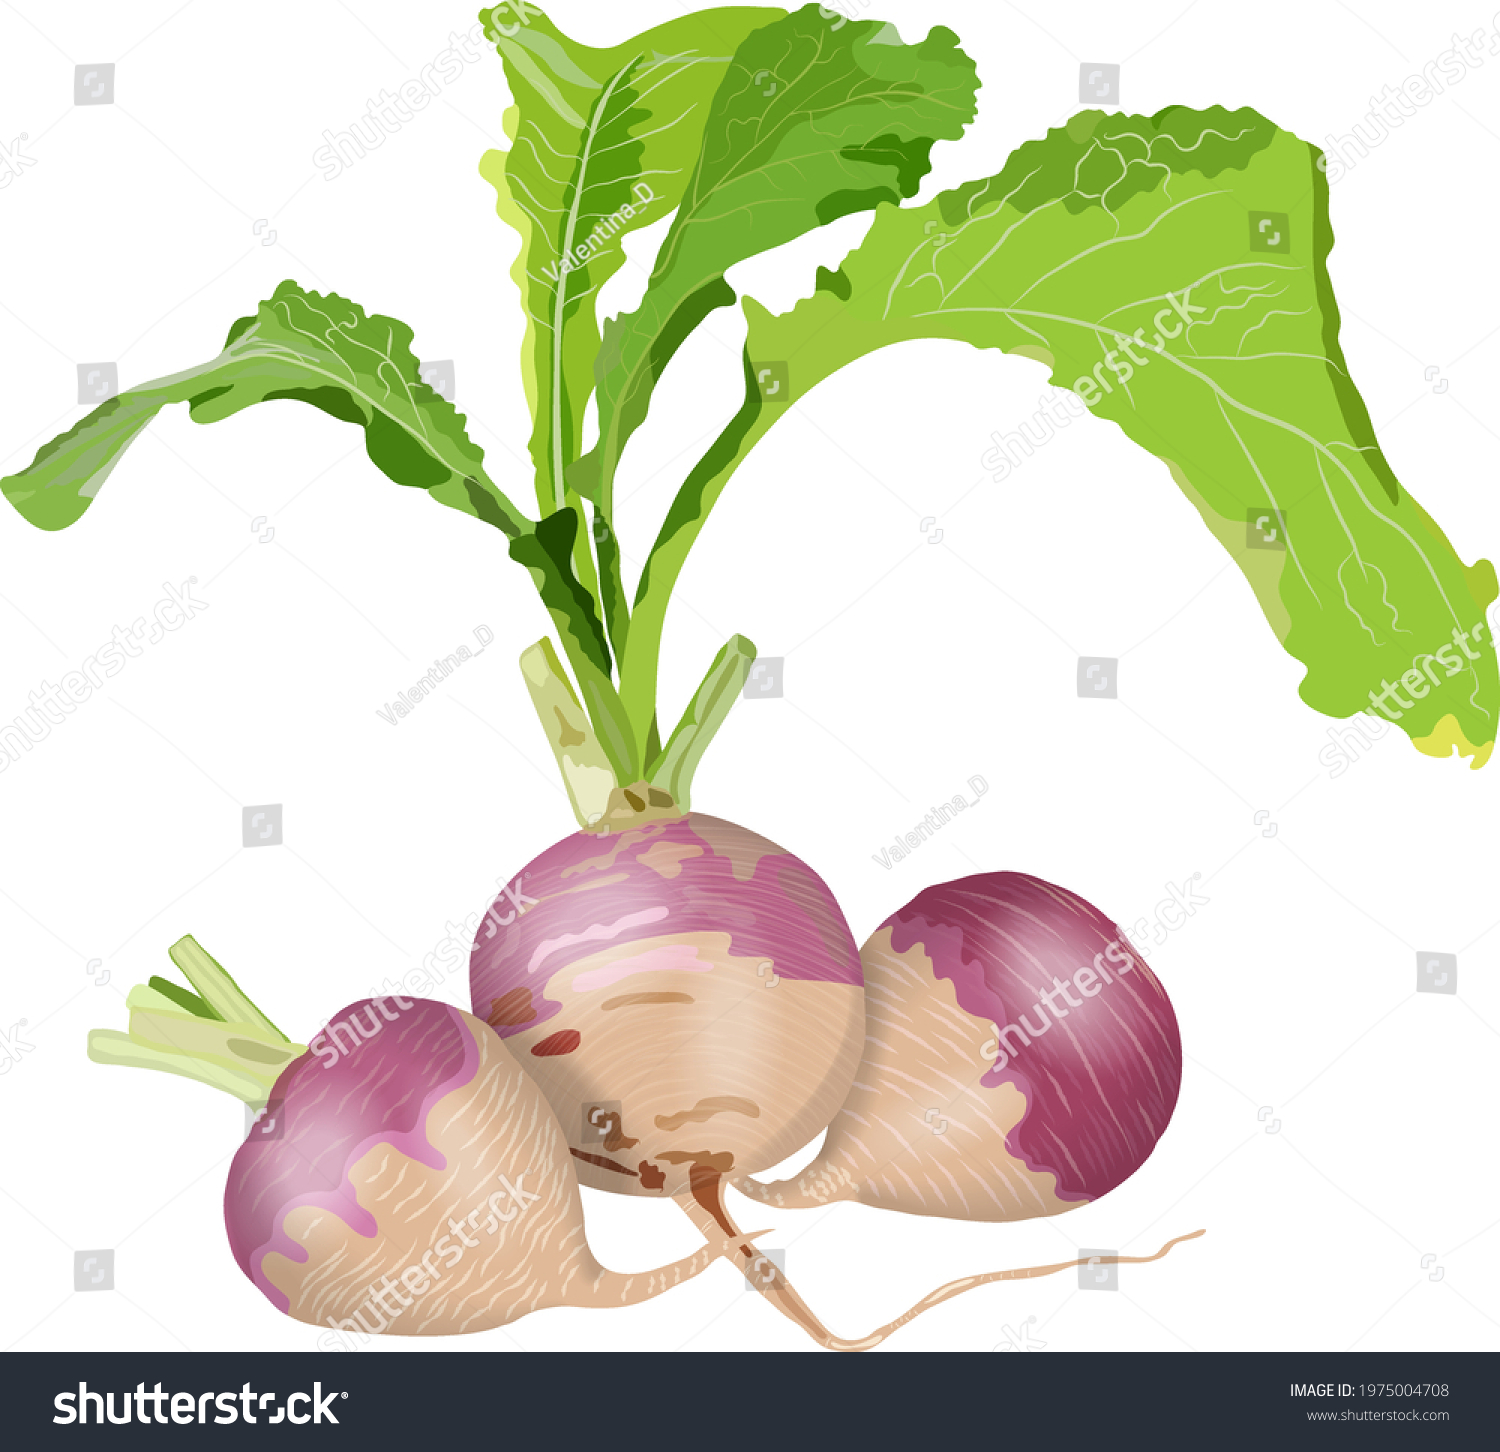 Purple top white globe turnips for banners, flyers. Whole turnip, turnip with tops. Fresh organic and healthy, diet and vegetarian vegetables. Vector illustration isolated on white background. #1975004708